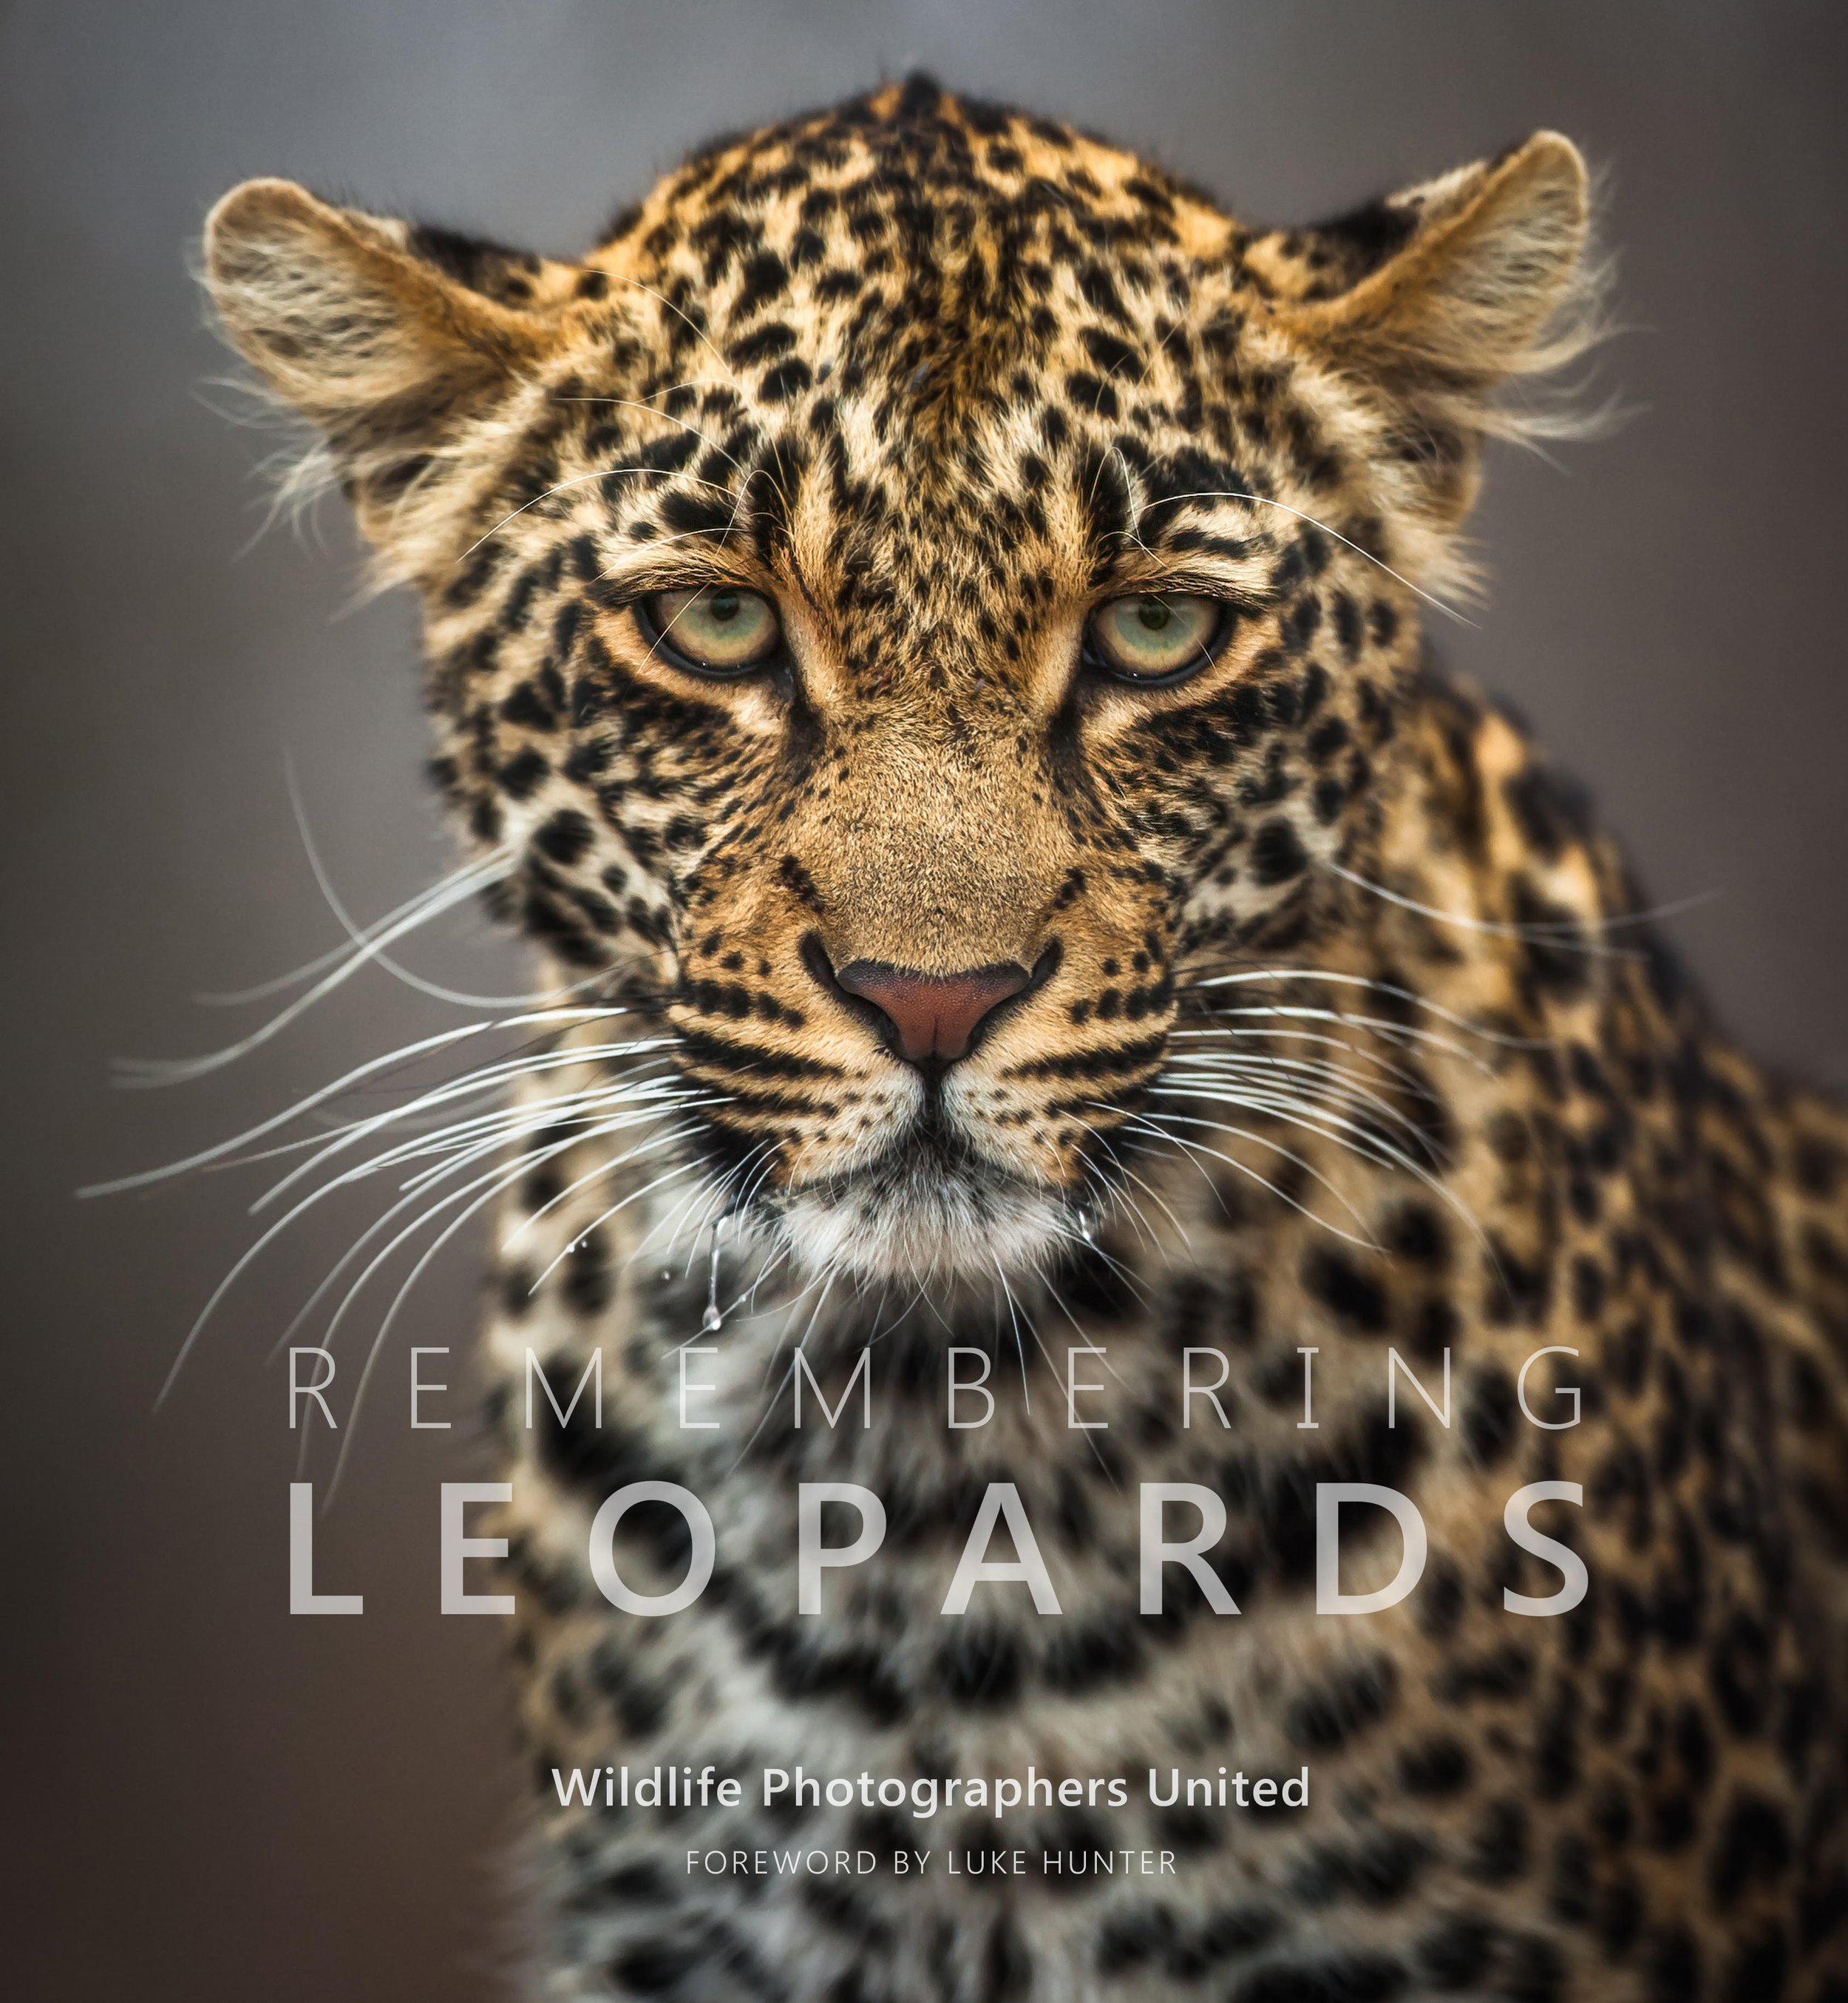 Remembering Leopards is the stunning eighth book in the Remembering Wildlife charity series. (Copy) (Copy) (Copy) (Copy) (Copy) (Copy) (Copy) (Copy) (Copy) (Copy) (Copy) (Copy) (Copy)